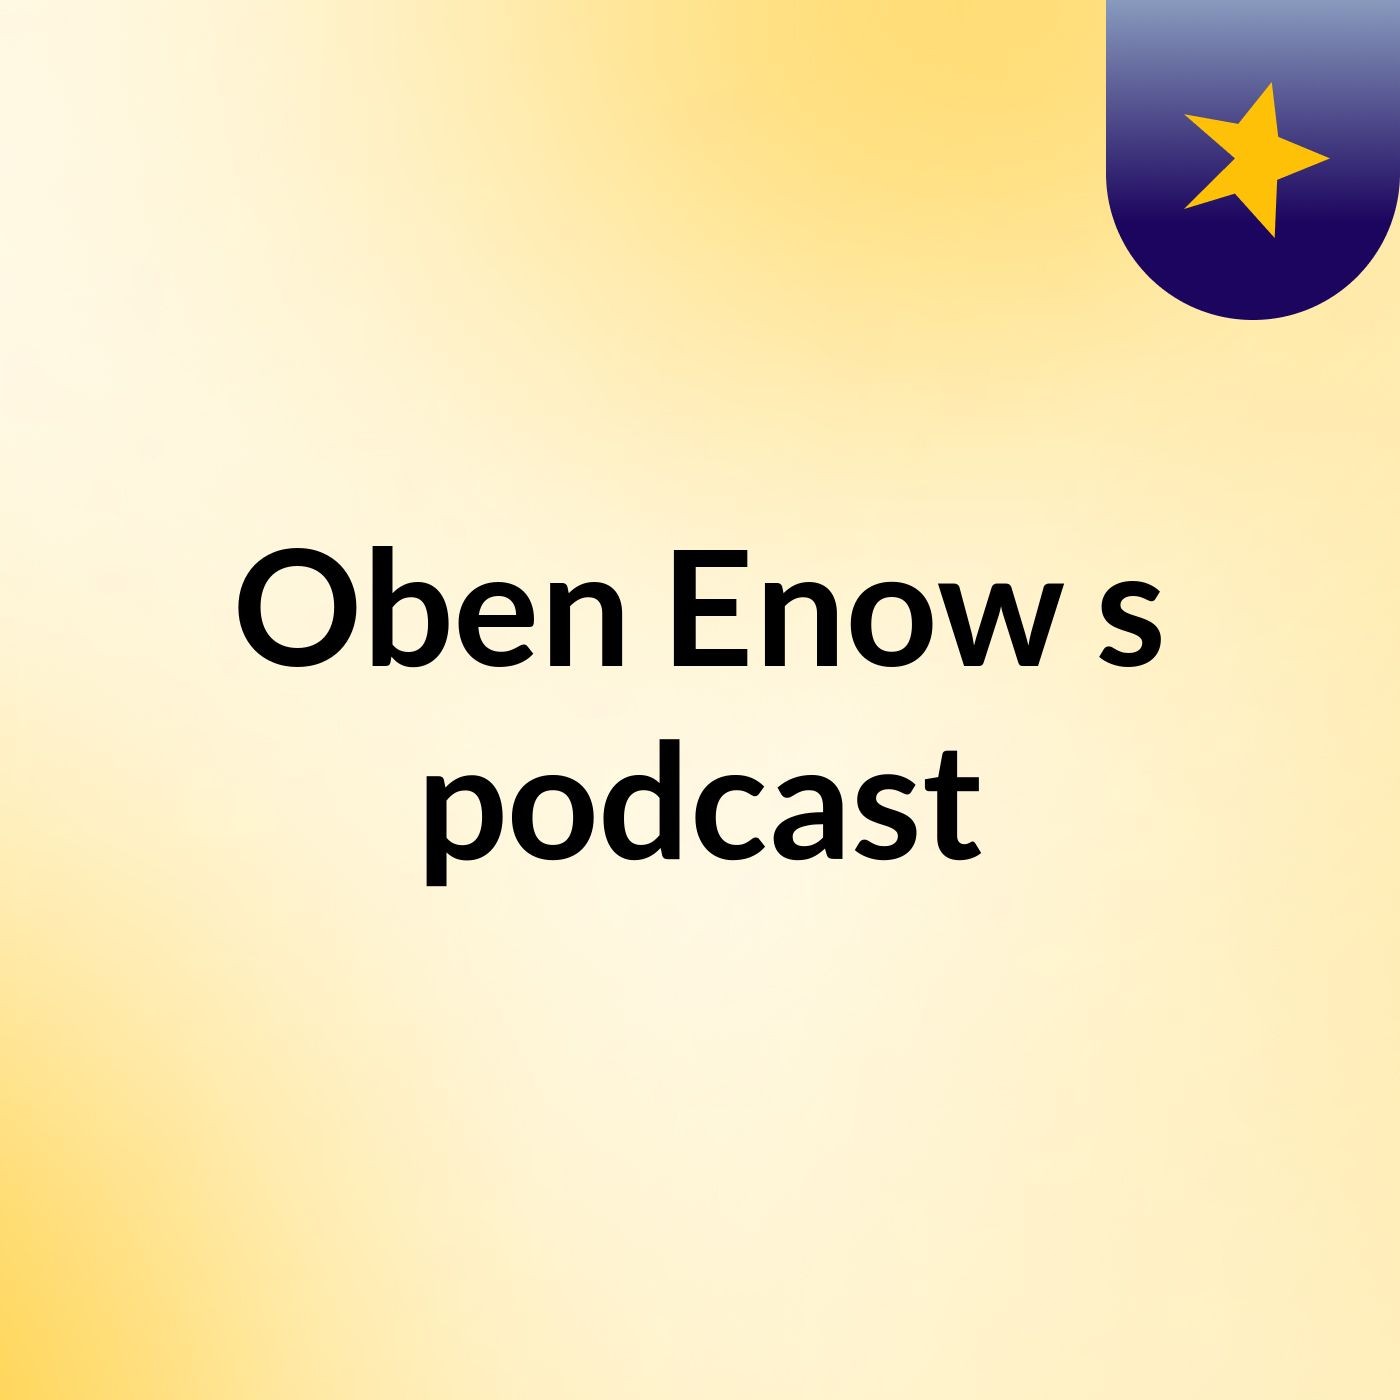 Oben Enow's podcast